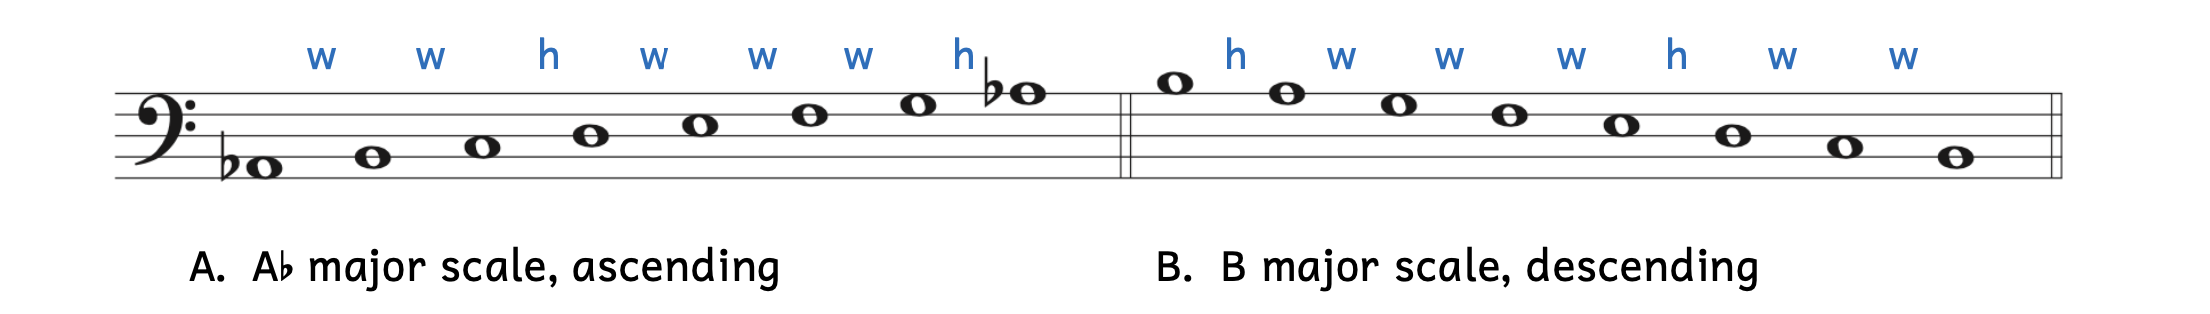 Example A adds the steps for writing an ascending major scale: whole, whole, half, whole, whole, whole, half. Examples B adds the steps fro writing a descending major scale. Be sure the steps are in reverse order: half, whole, whole, whole, half, whole, whole.